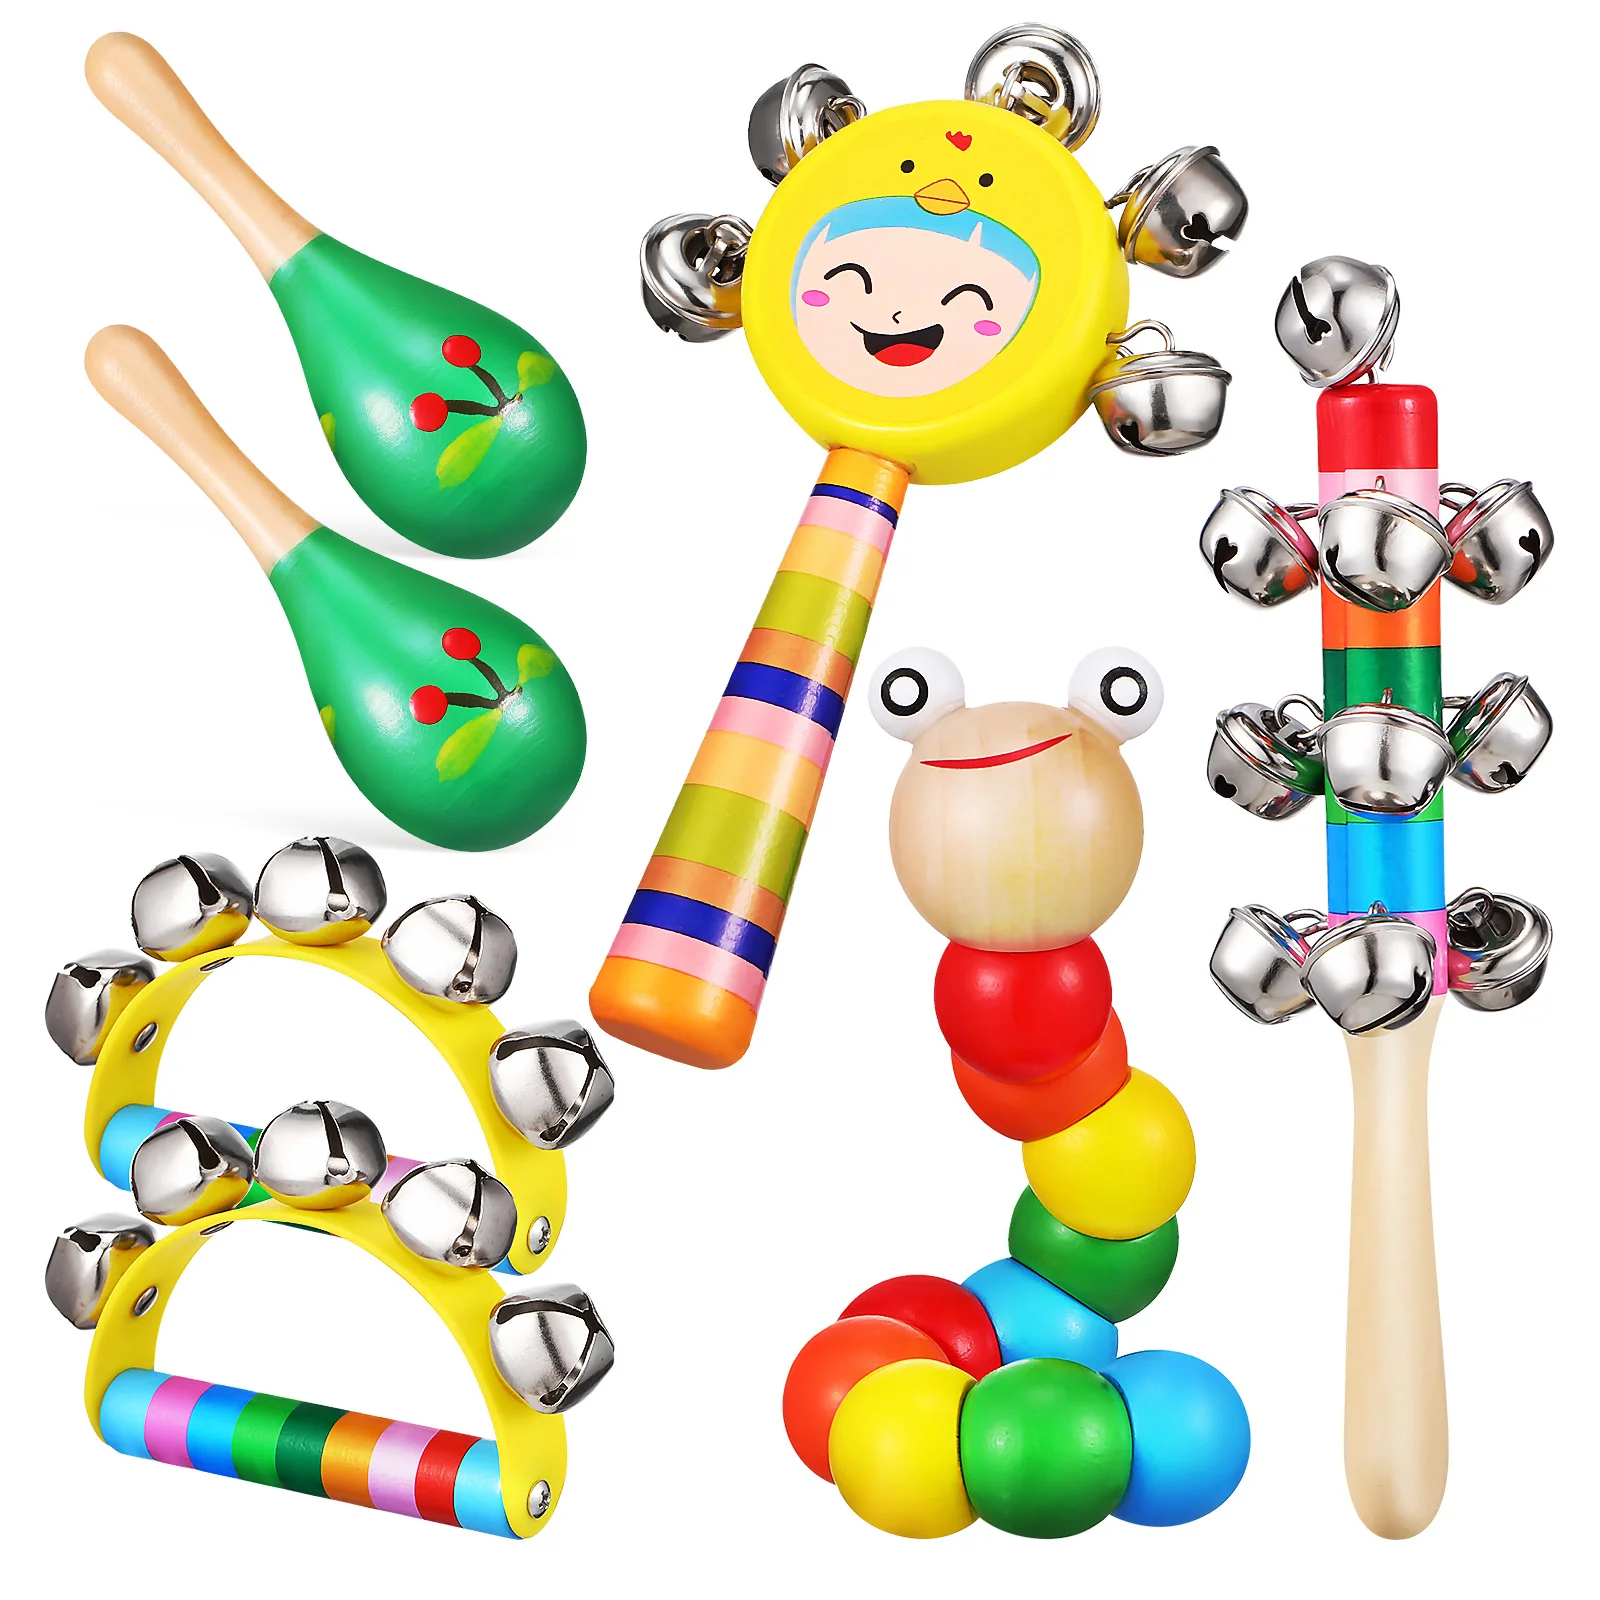 

Hand Toy Baby Toys Percussion Instrument Mini Wooden Maracas Musical Instruments The Bell Shaking Bells Rattles